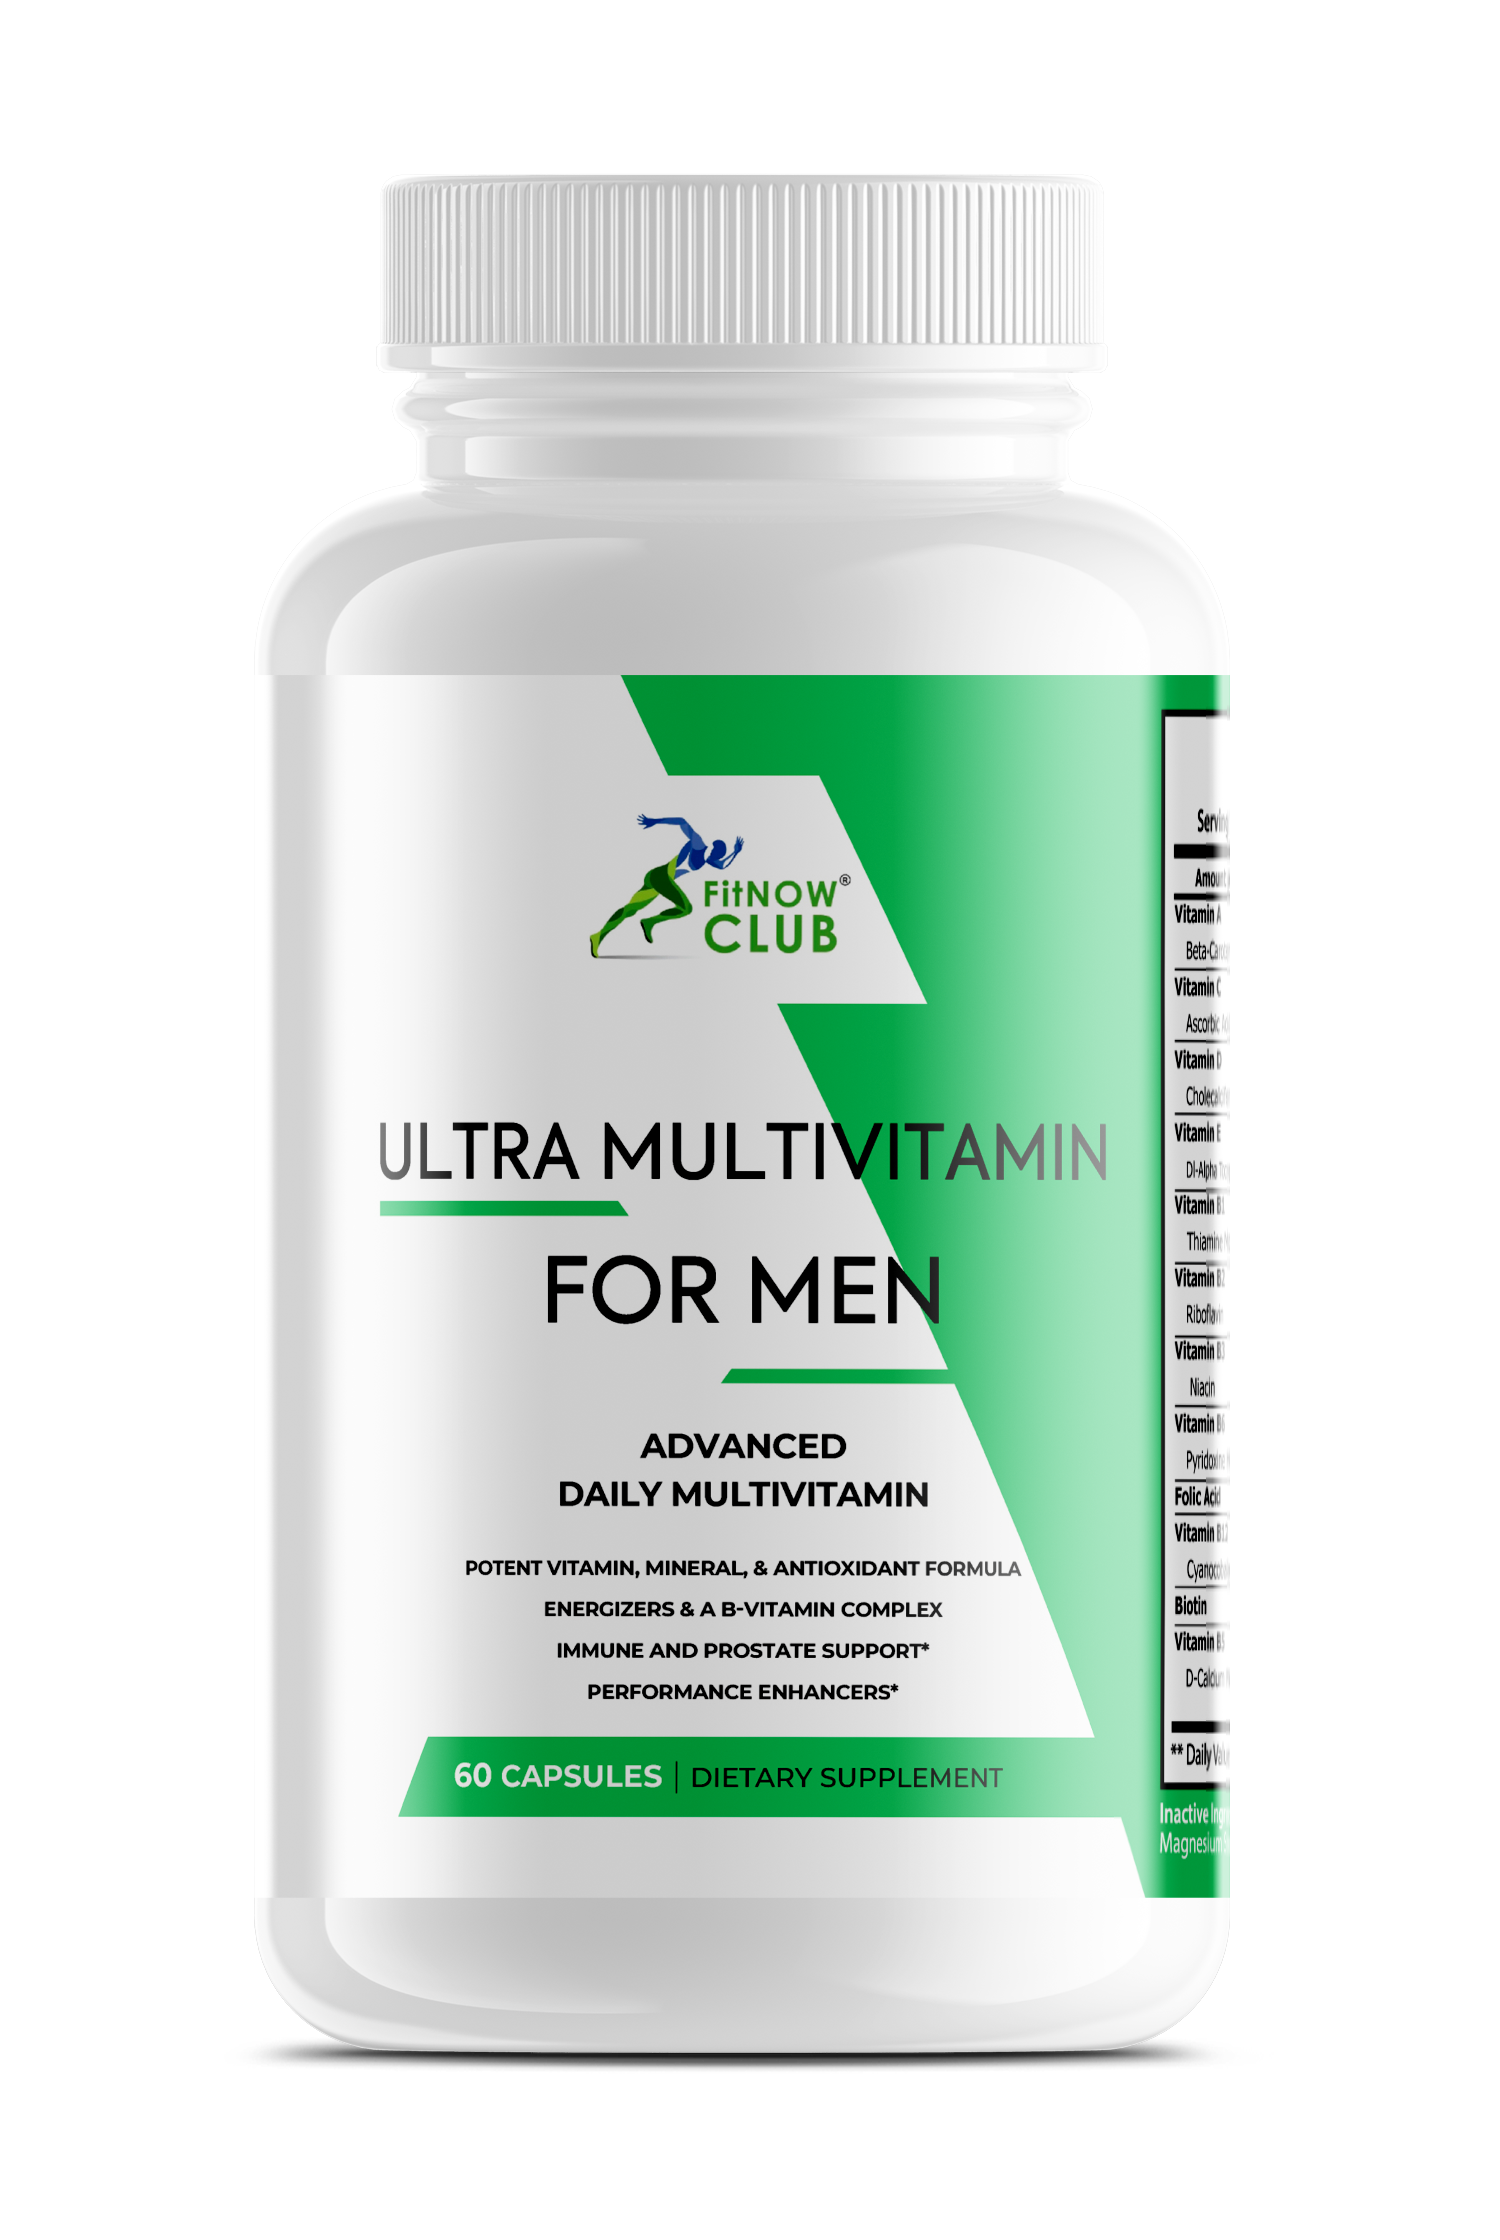 Ultra Multivitamin for Men-1 pack (60 count) - FitNOW Club